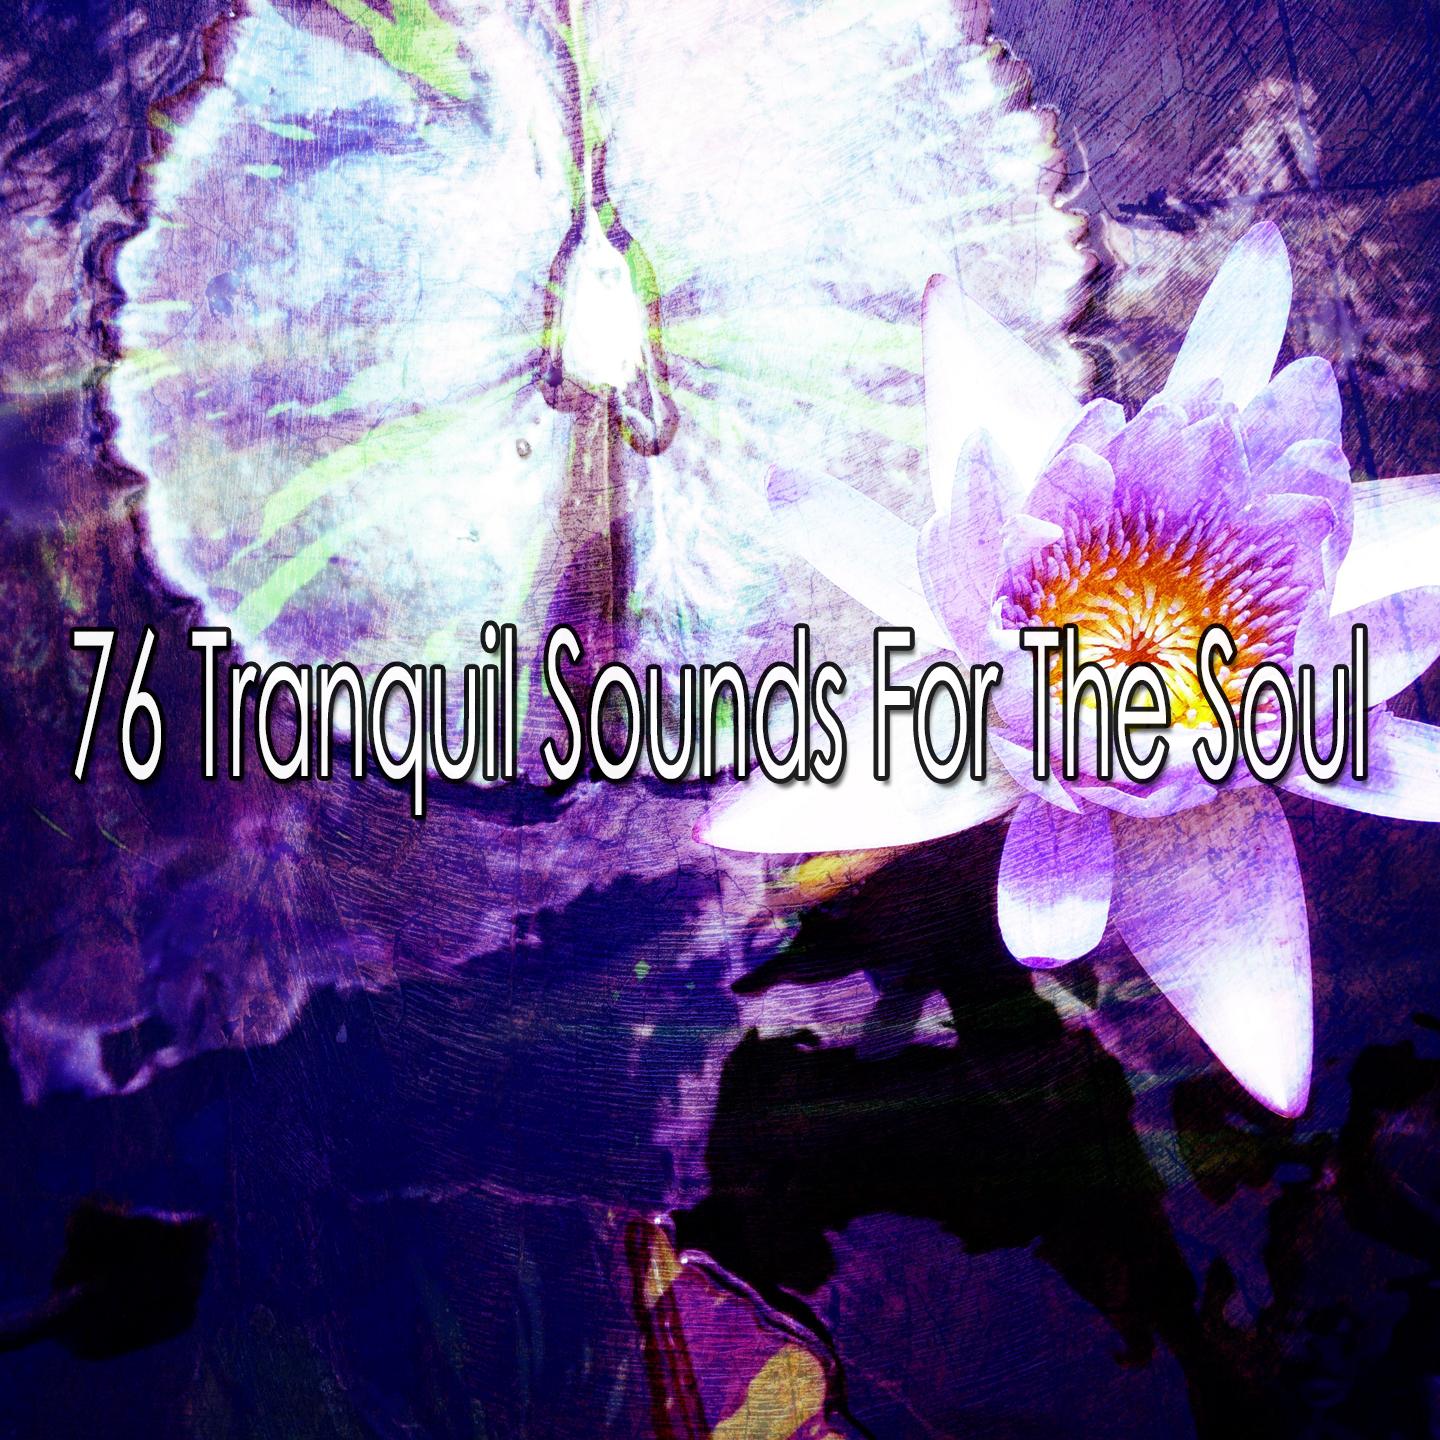 76 Tranquil Sounds for the Soul